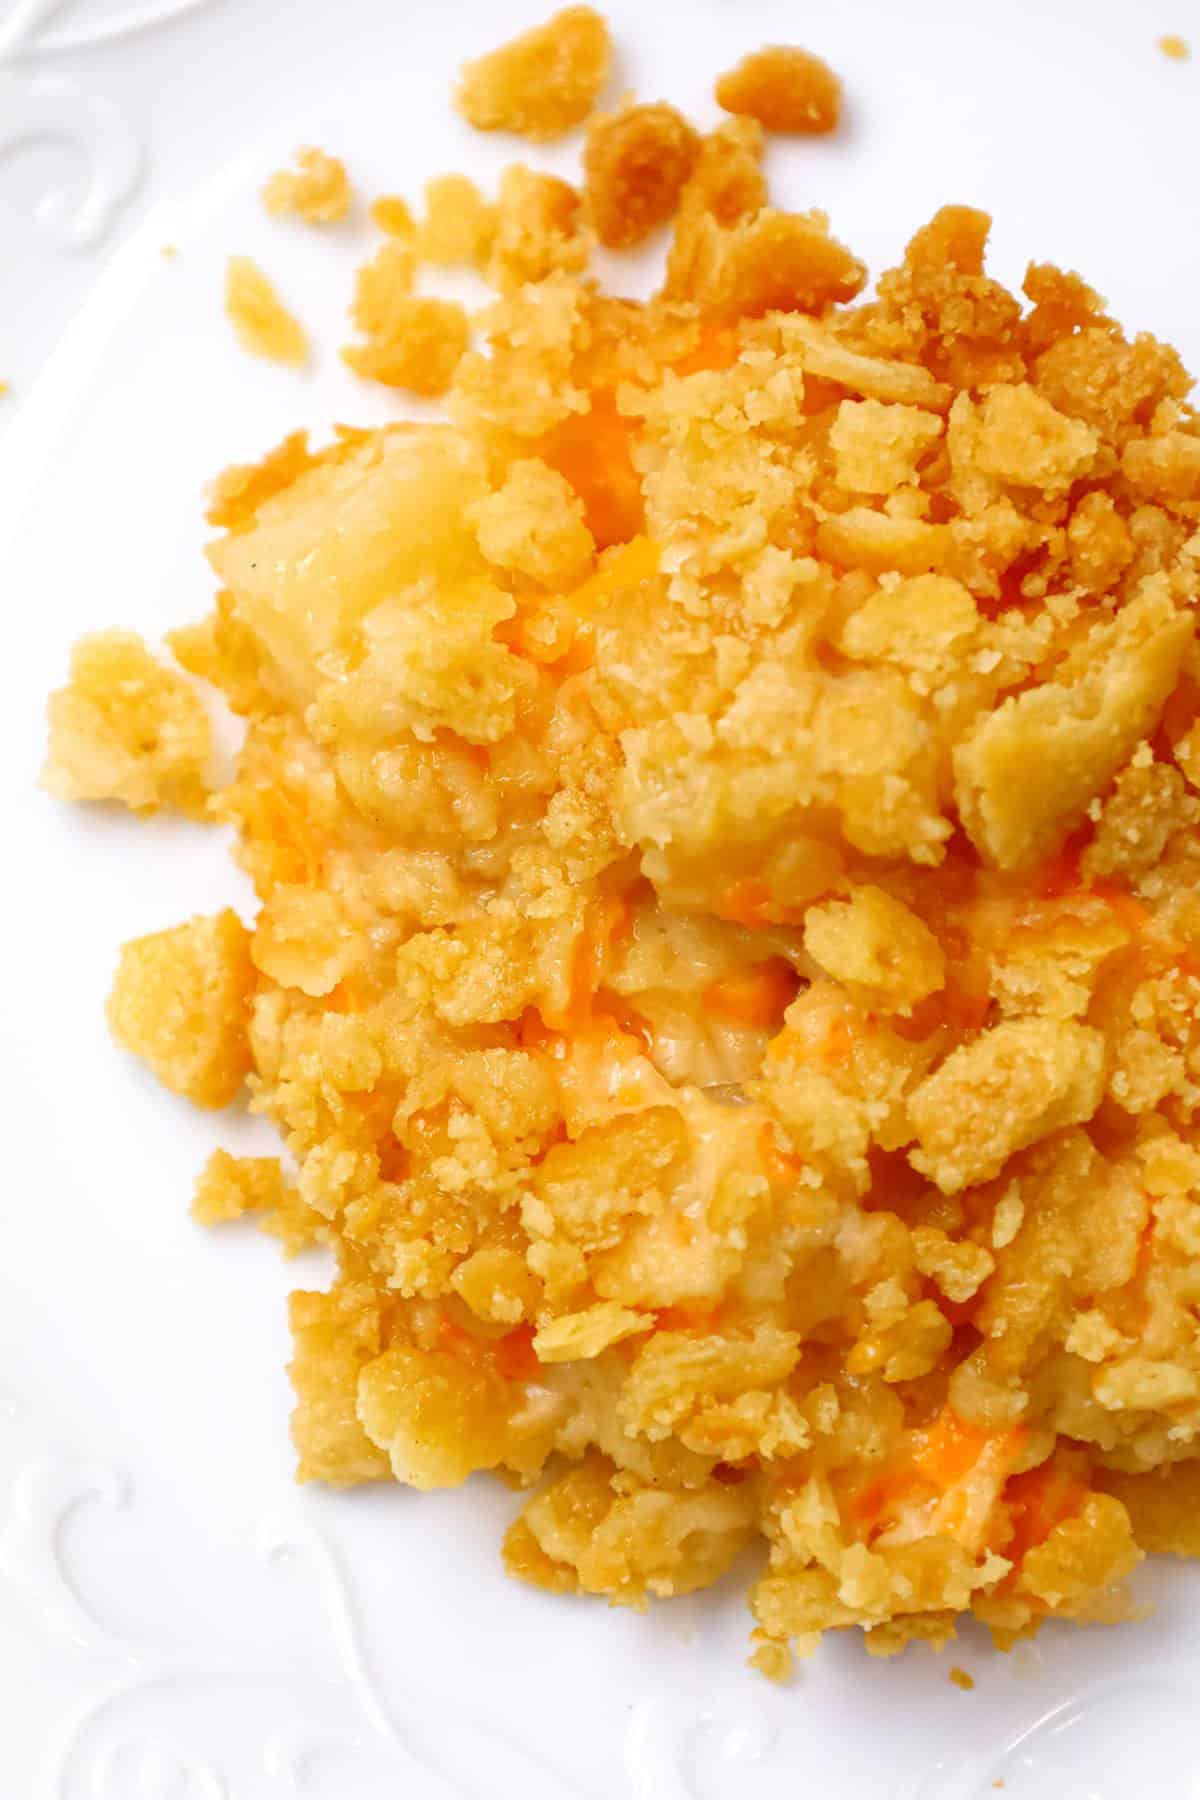 Pineapple Casserole is a sweet and savoury side dish recipe loaded with pineapple chunks, cheddar cheese and Ritz cracker crumbs.